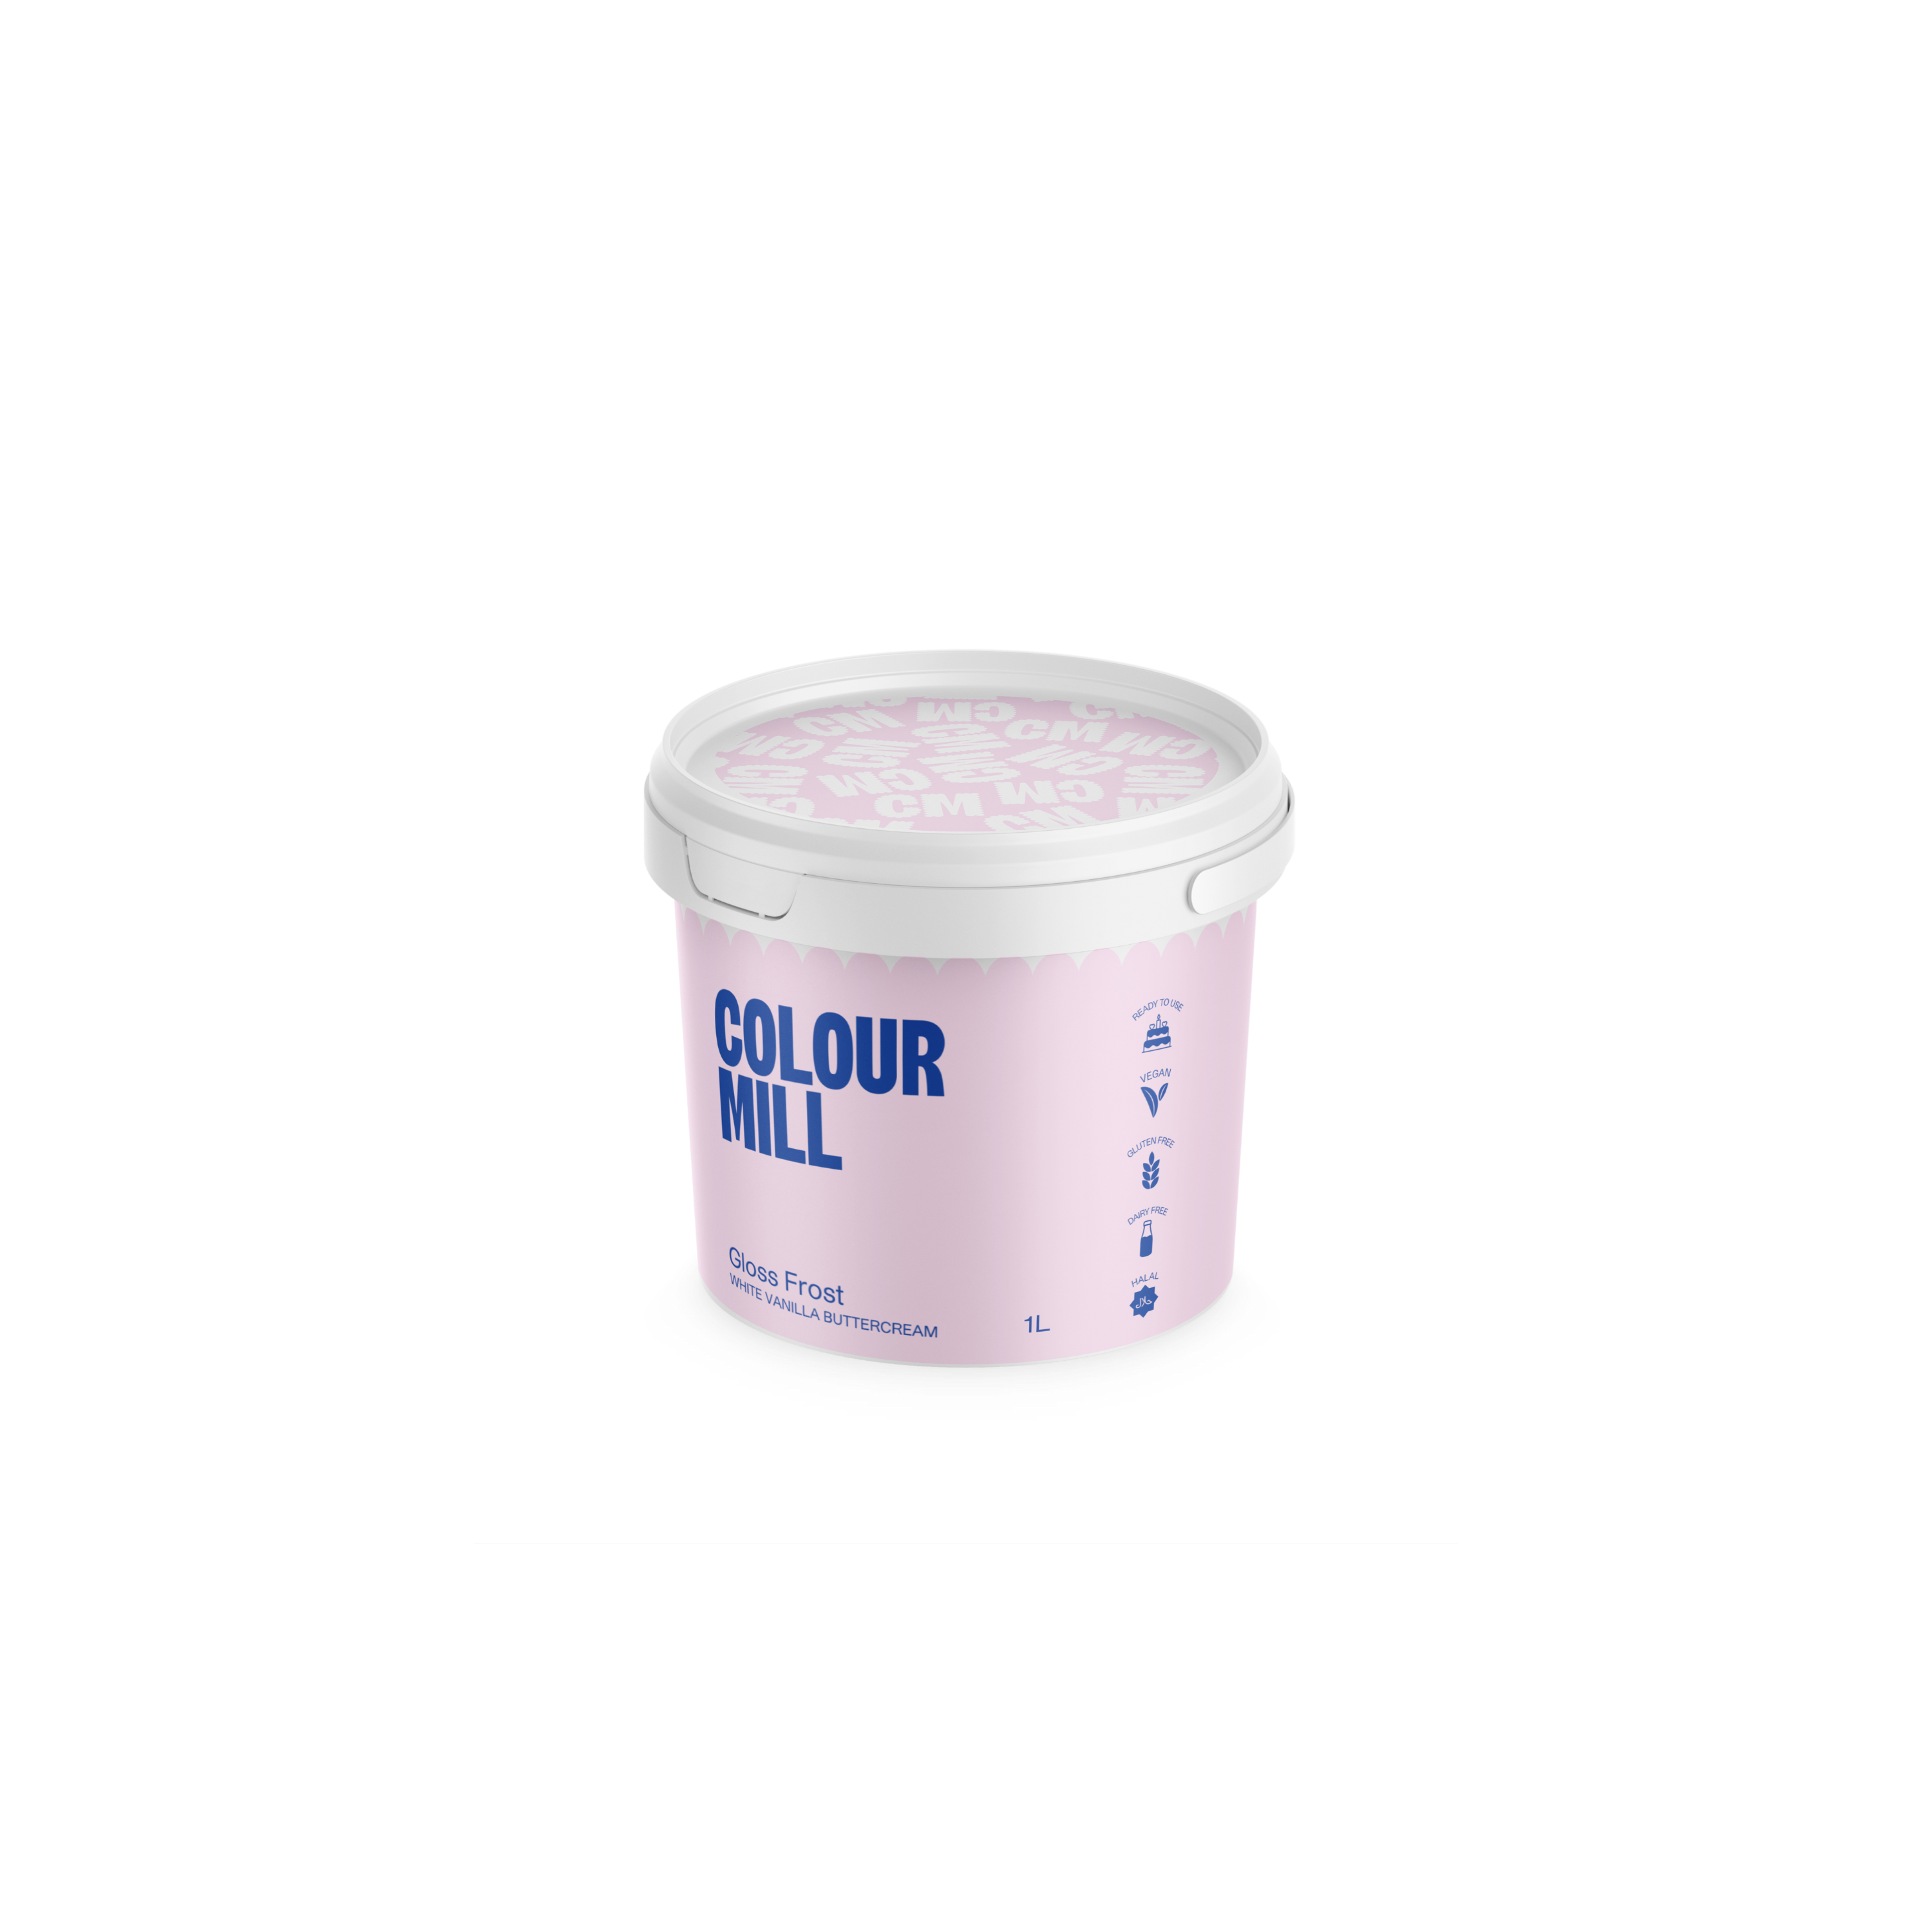 Gloss Frost White Buttercreamproduct image